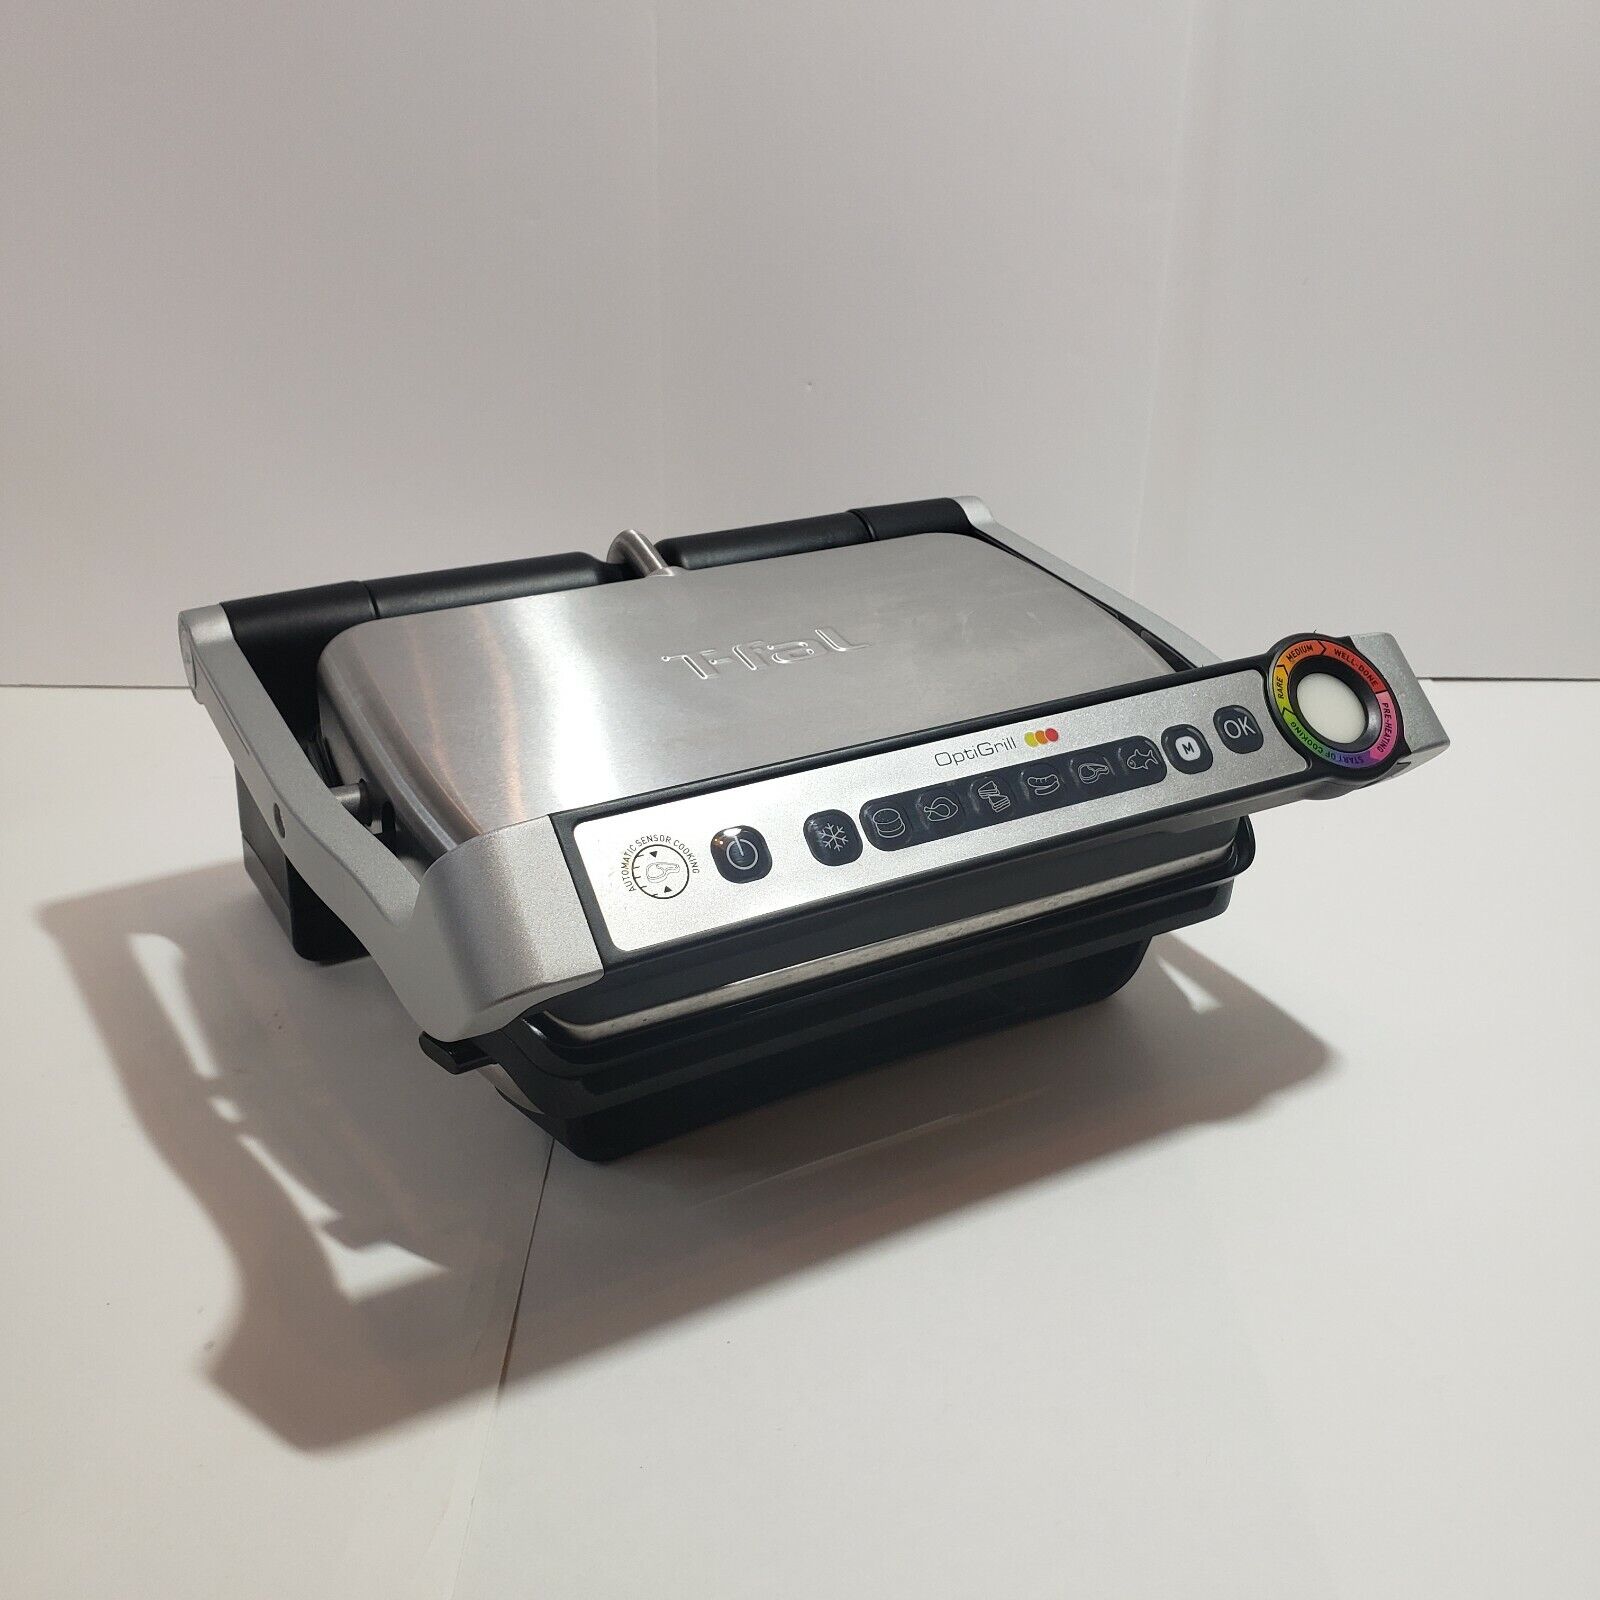 T-Fal Optigrill Indoor Grill SERIE 8351 s1 Meat Grill